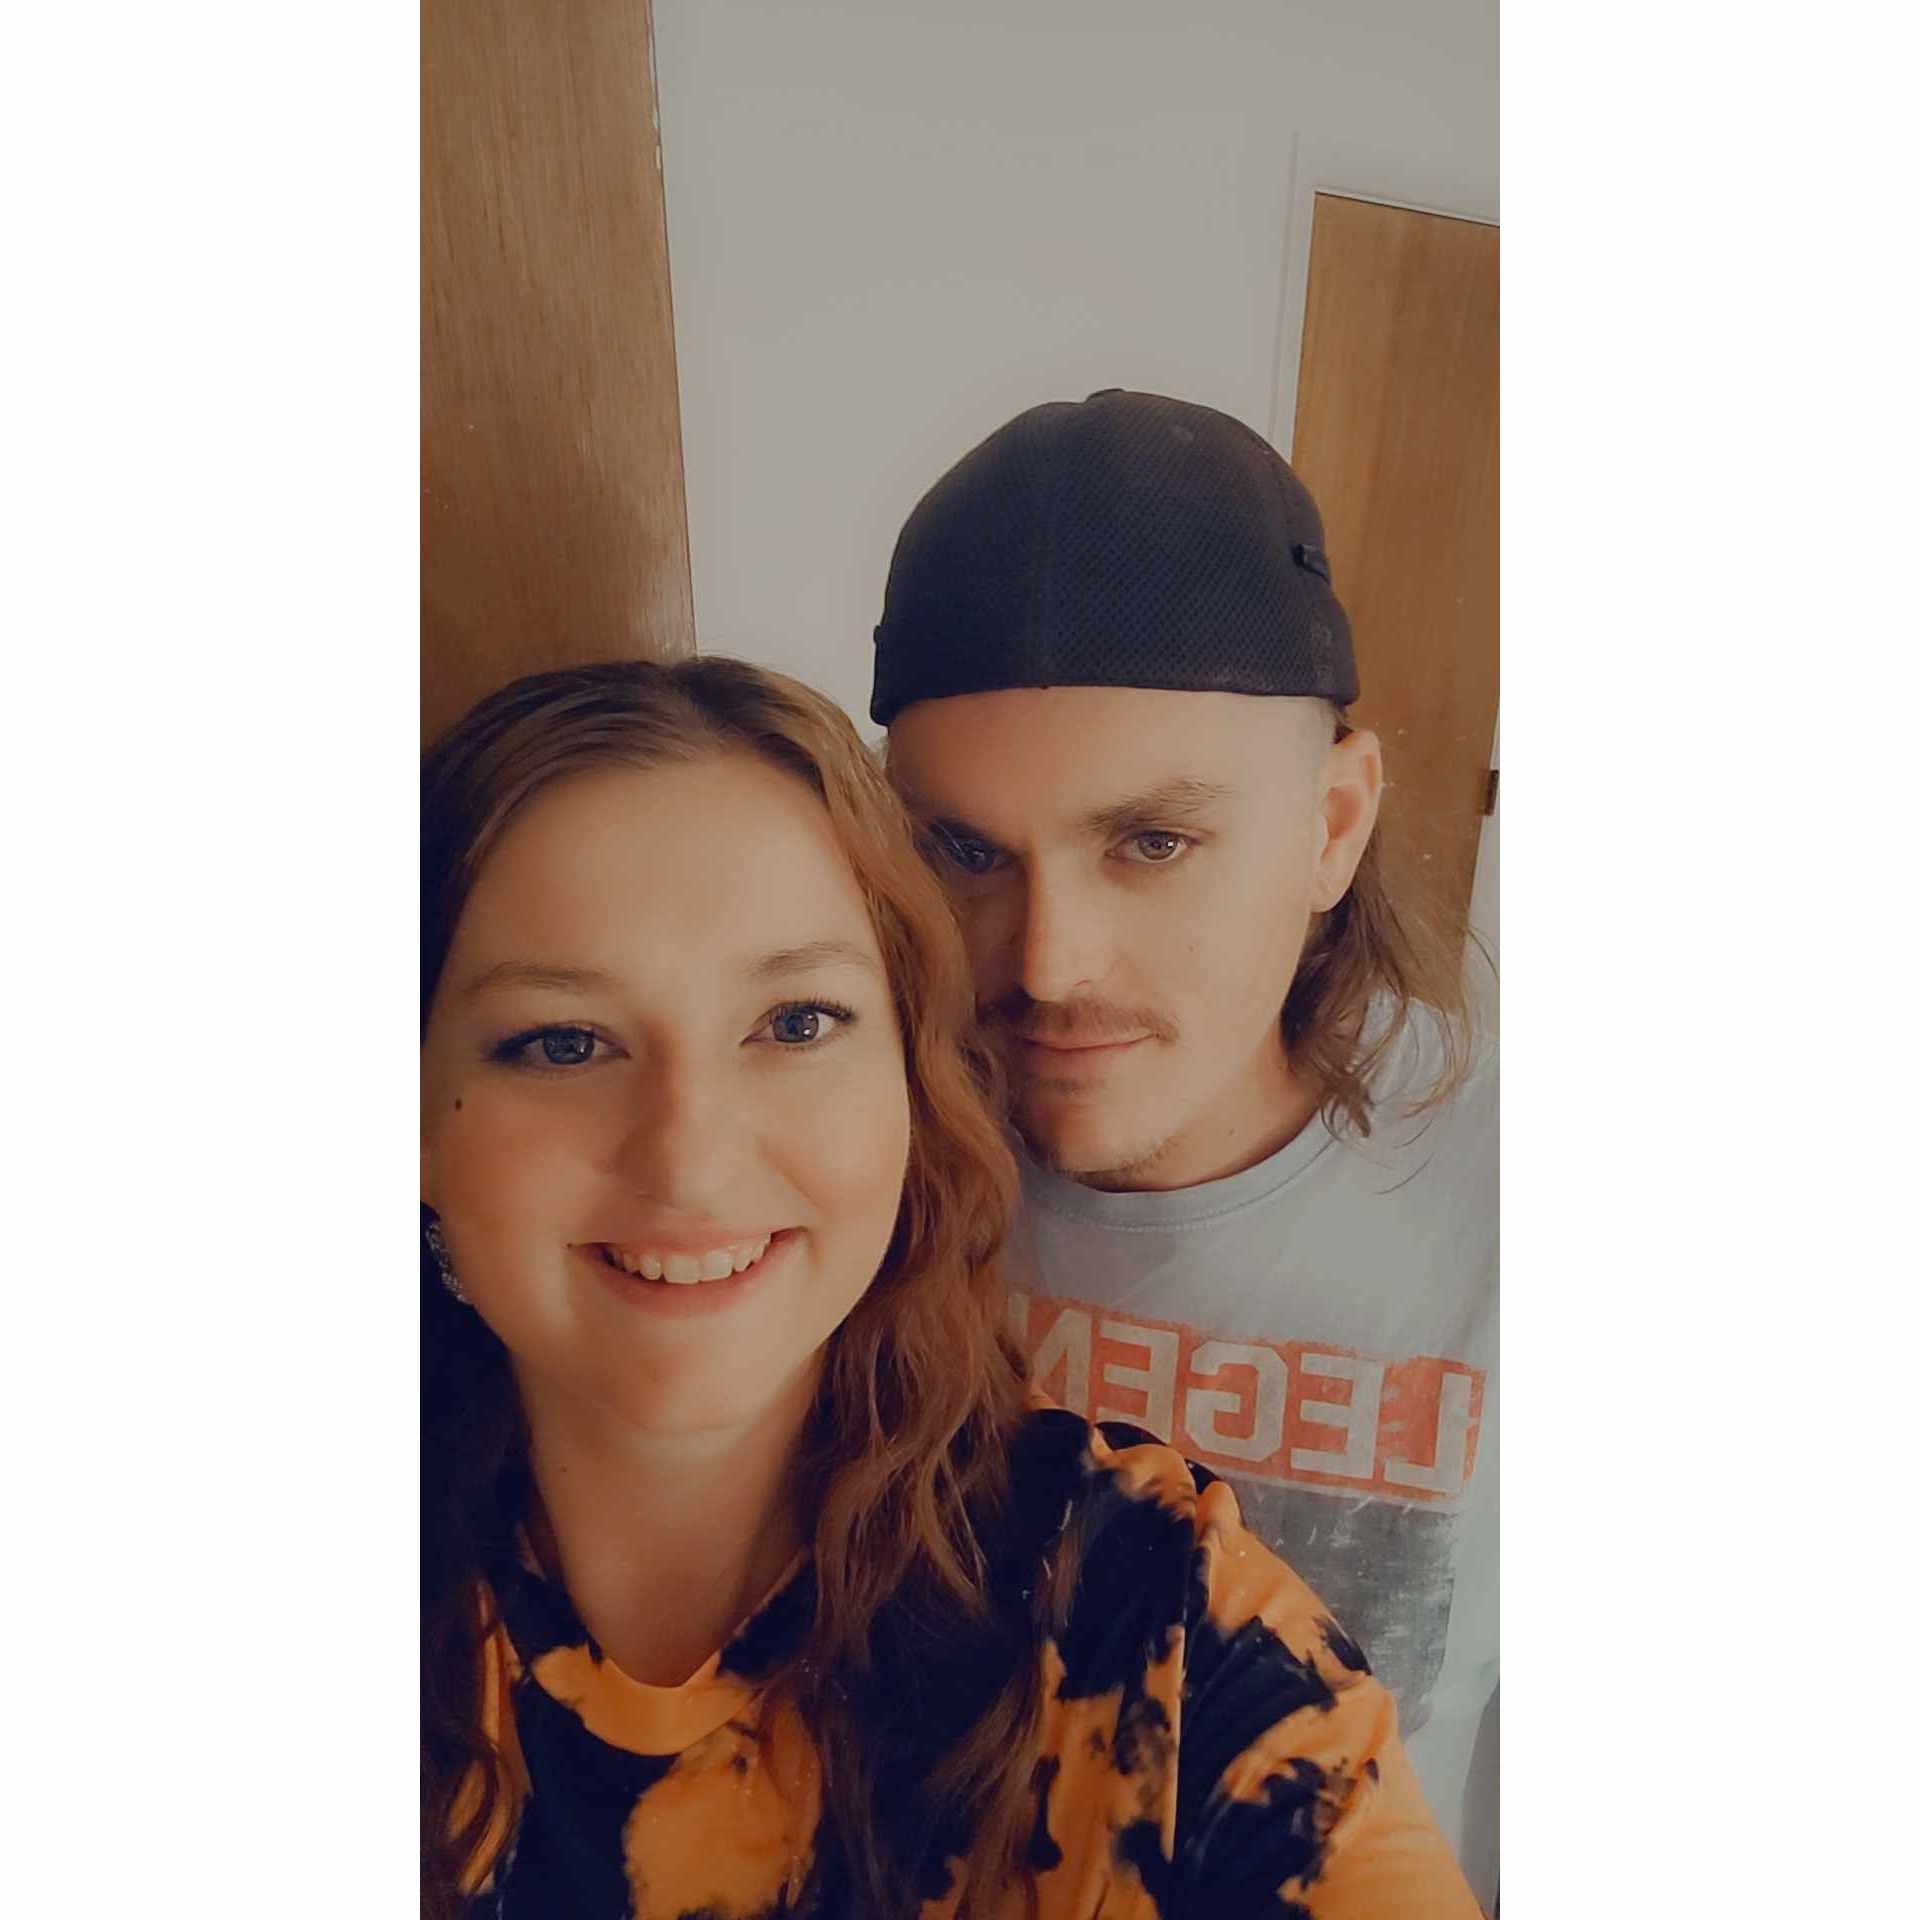 The picture we took after our mini engagement party.